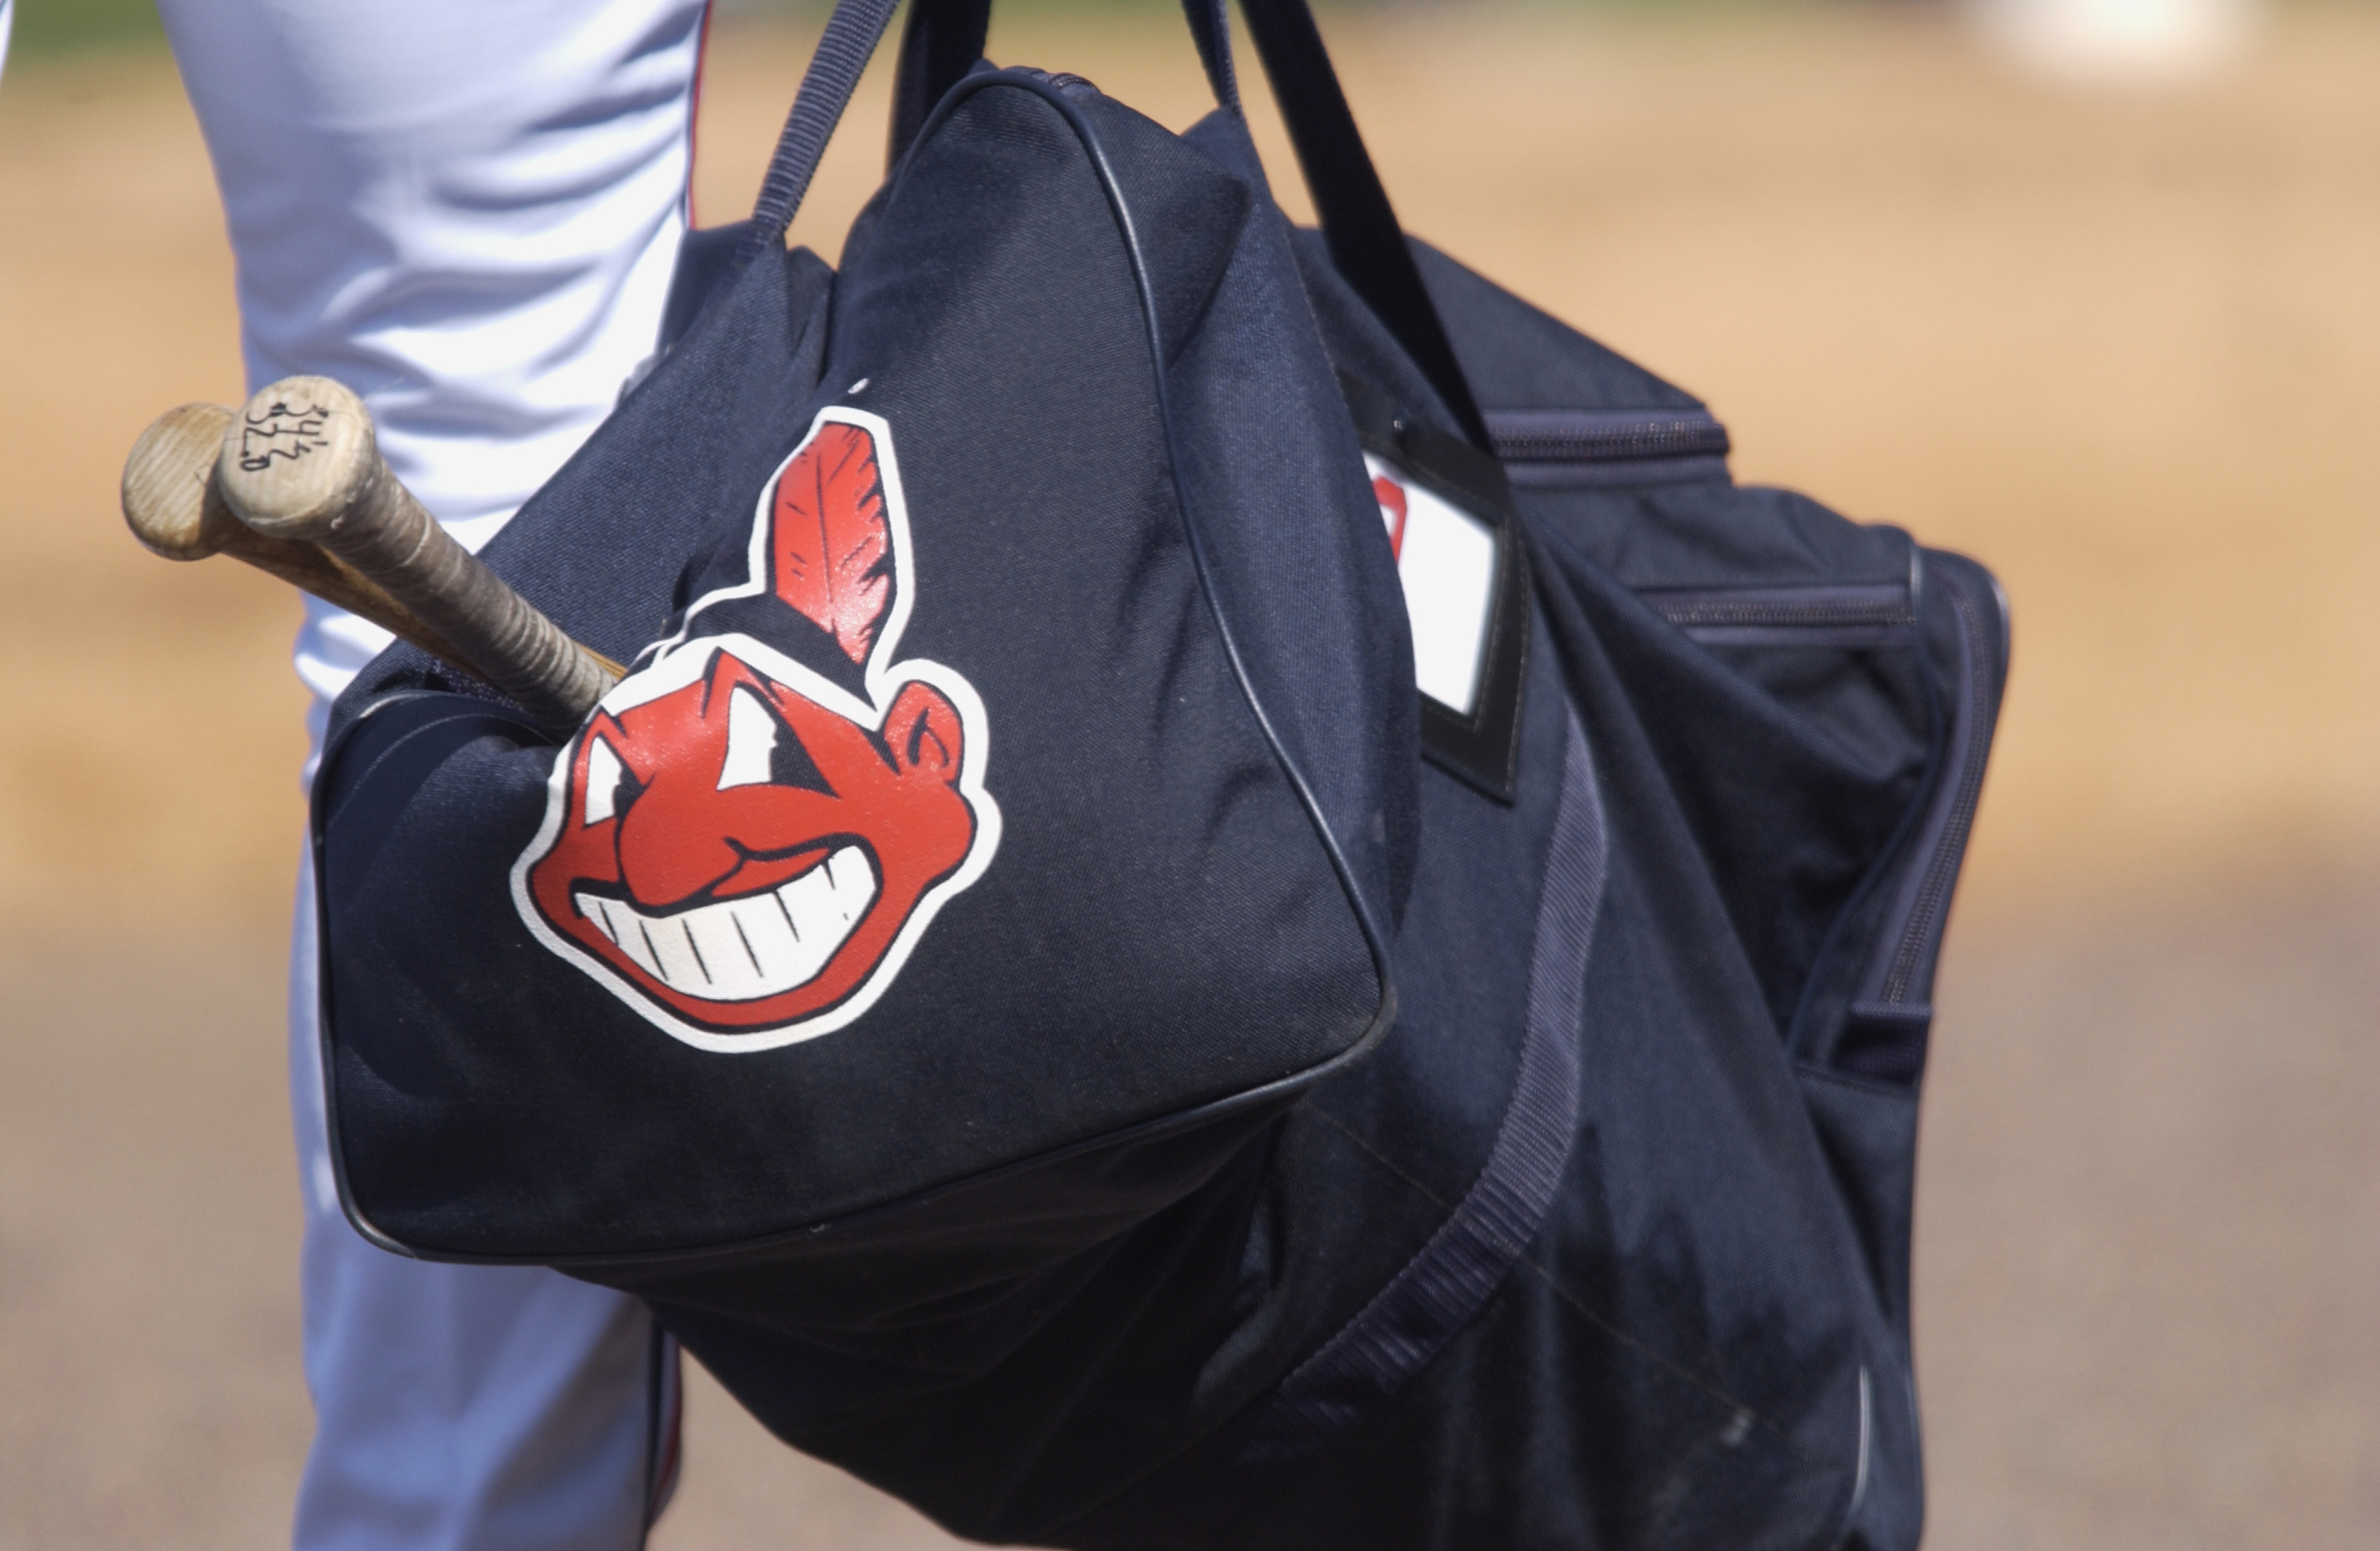 28 Feb 2002: A picture of the Cleveland Indians logo printed on a bag during the spring training game between the Minnesota Twins and the Cleveland Indians at Chain of Lakes Park in Winter Haven, Florida. The Twins won 6-4. DIGITAL IMAGE. Mandatory Credit